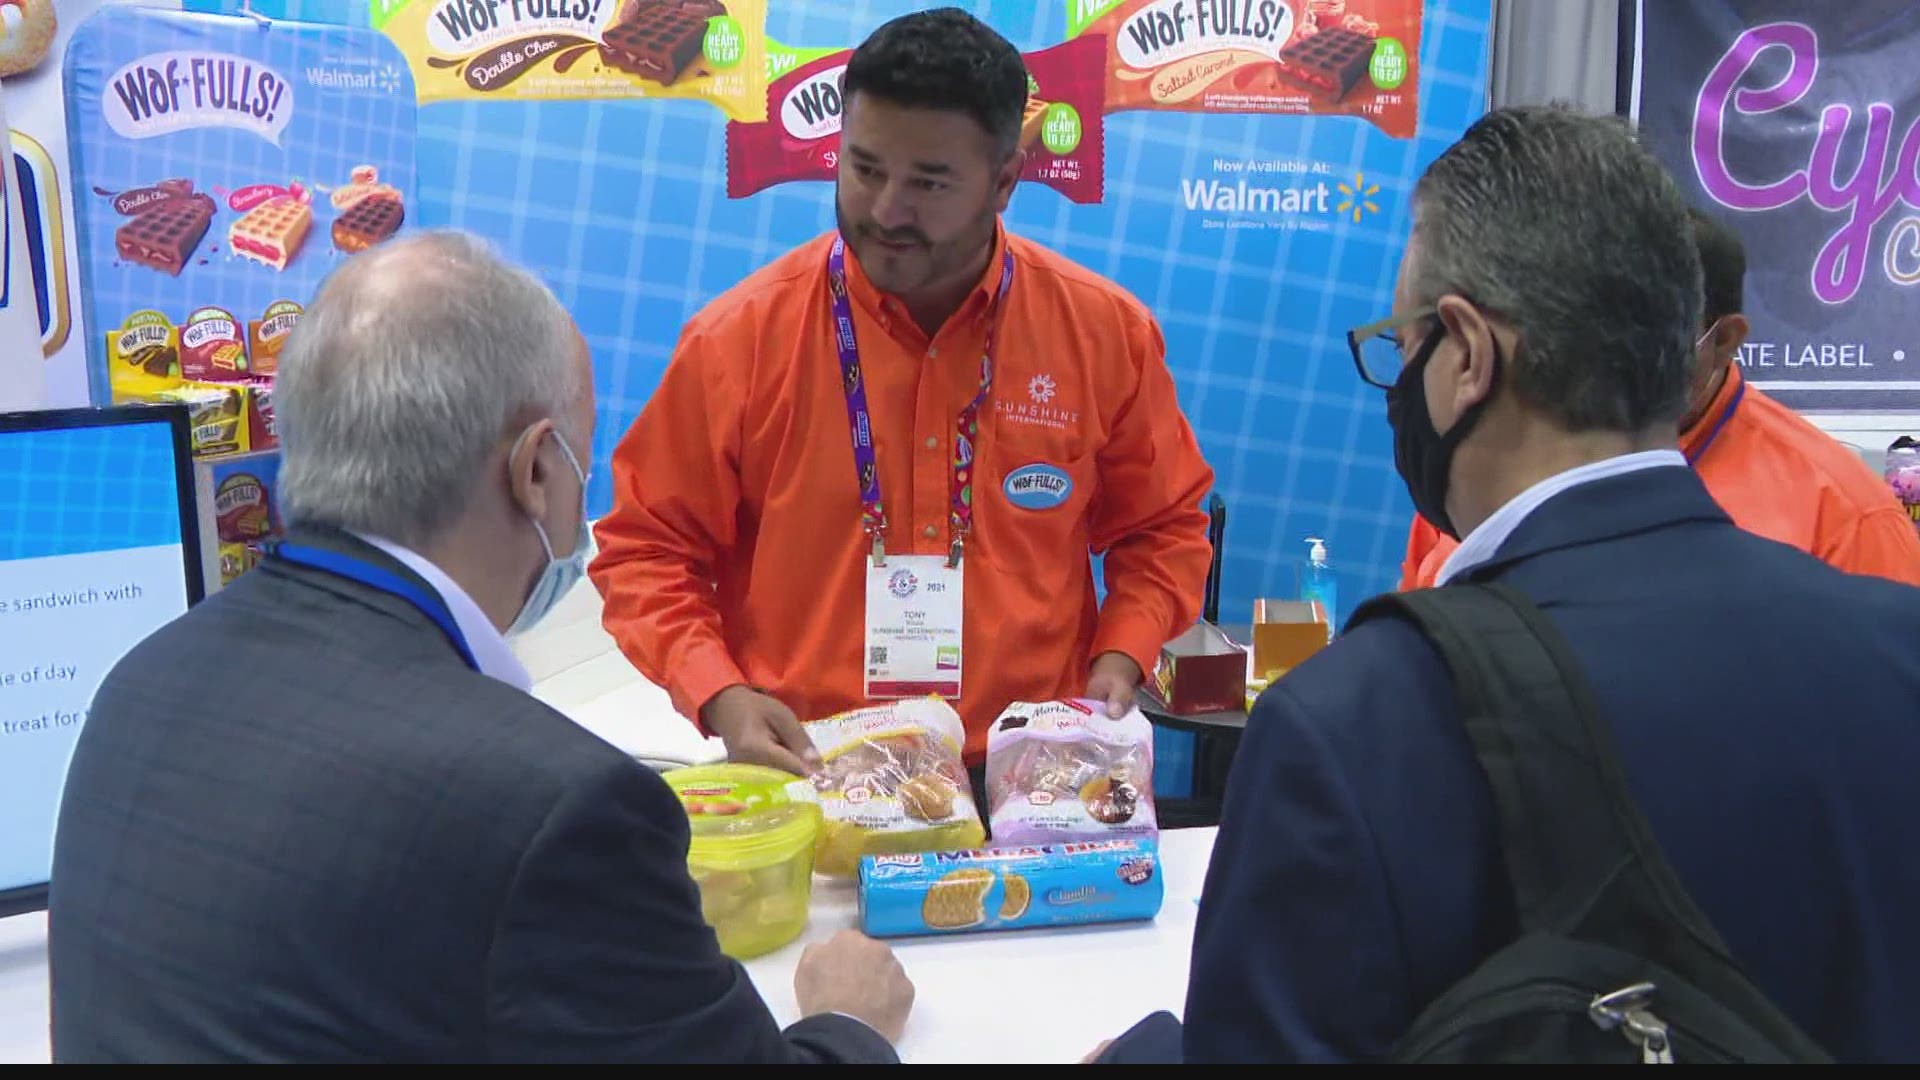 The Indiana Convention Center is hosting its first post-pandemic trade show. The Sweets & Snacks Expo is a much-needed treat for businesses hurt by the pandemic.